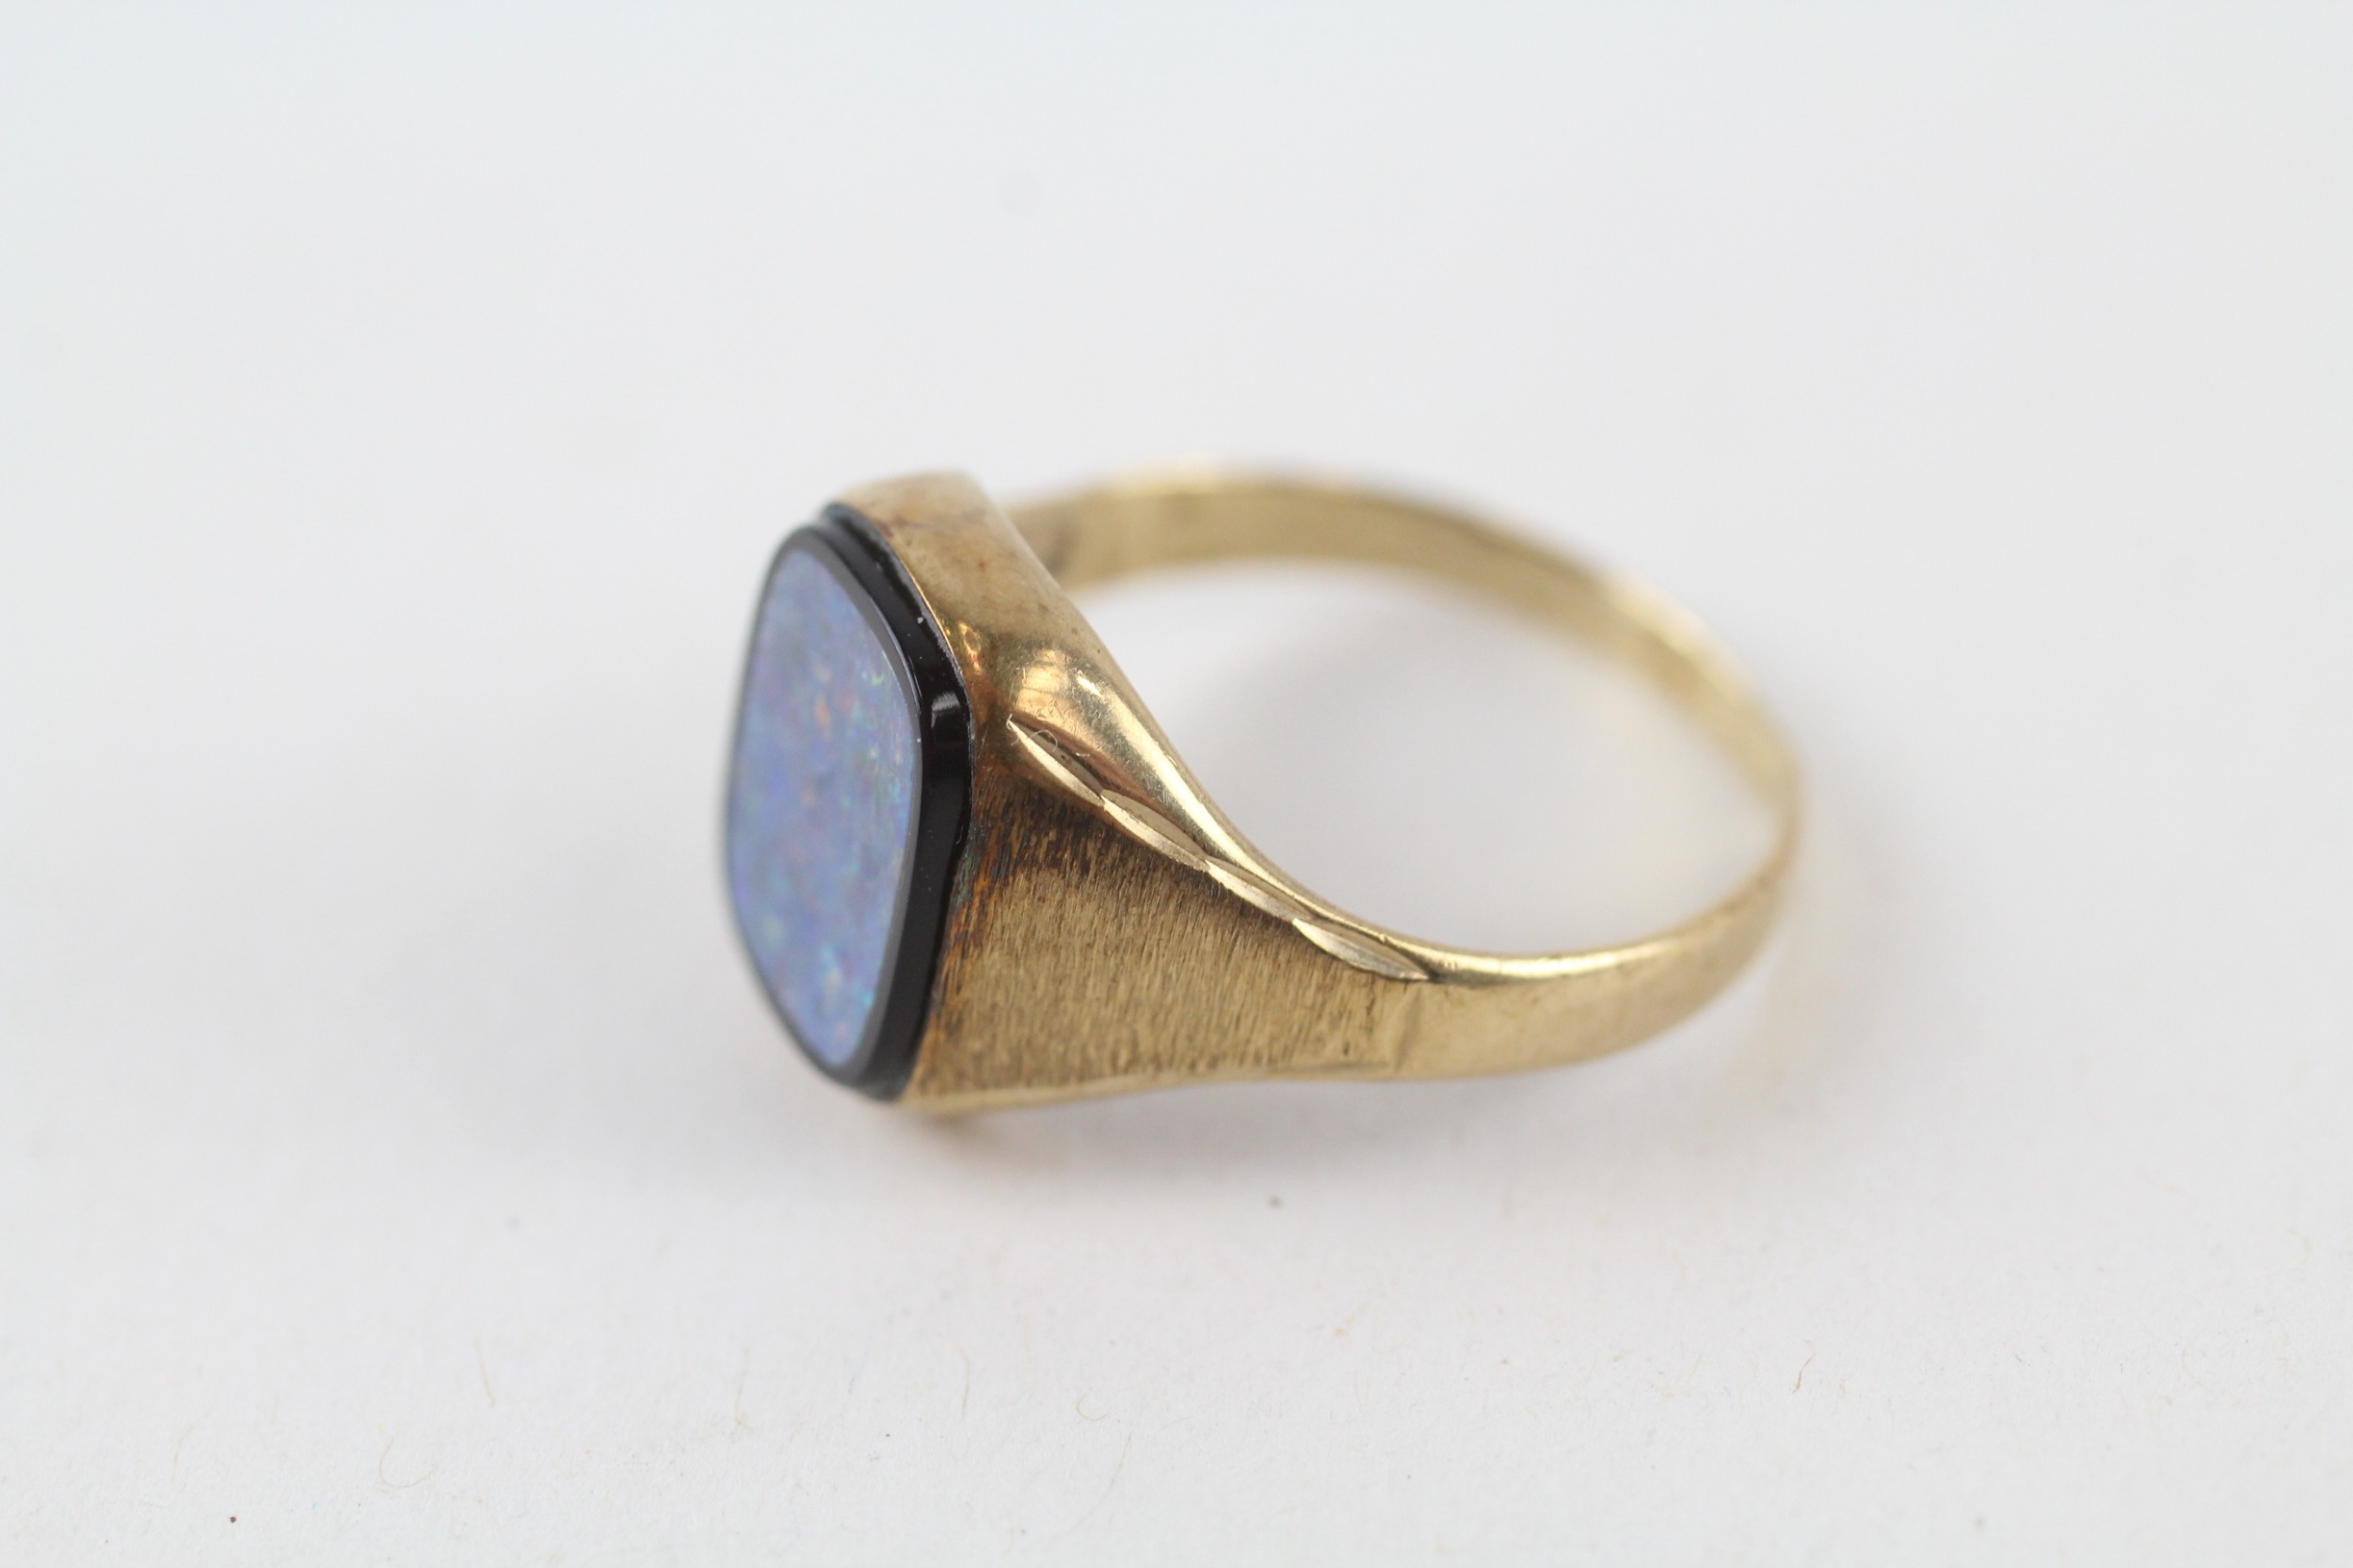 9ct gold 1980's opal double signet ring with bark effect shoulders (2.4g) - Image 3 of 5